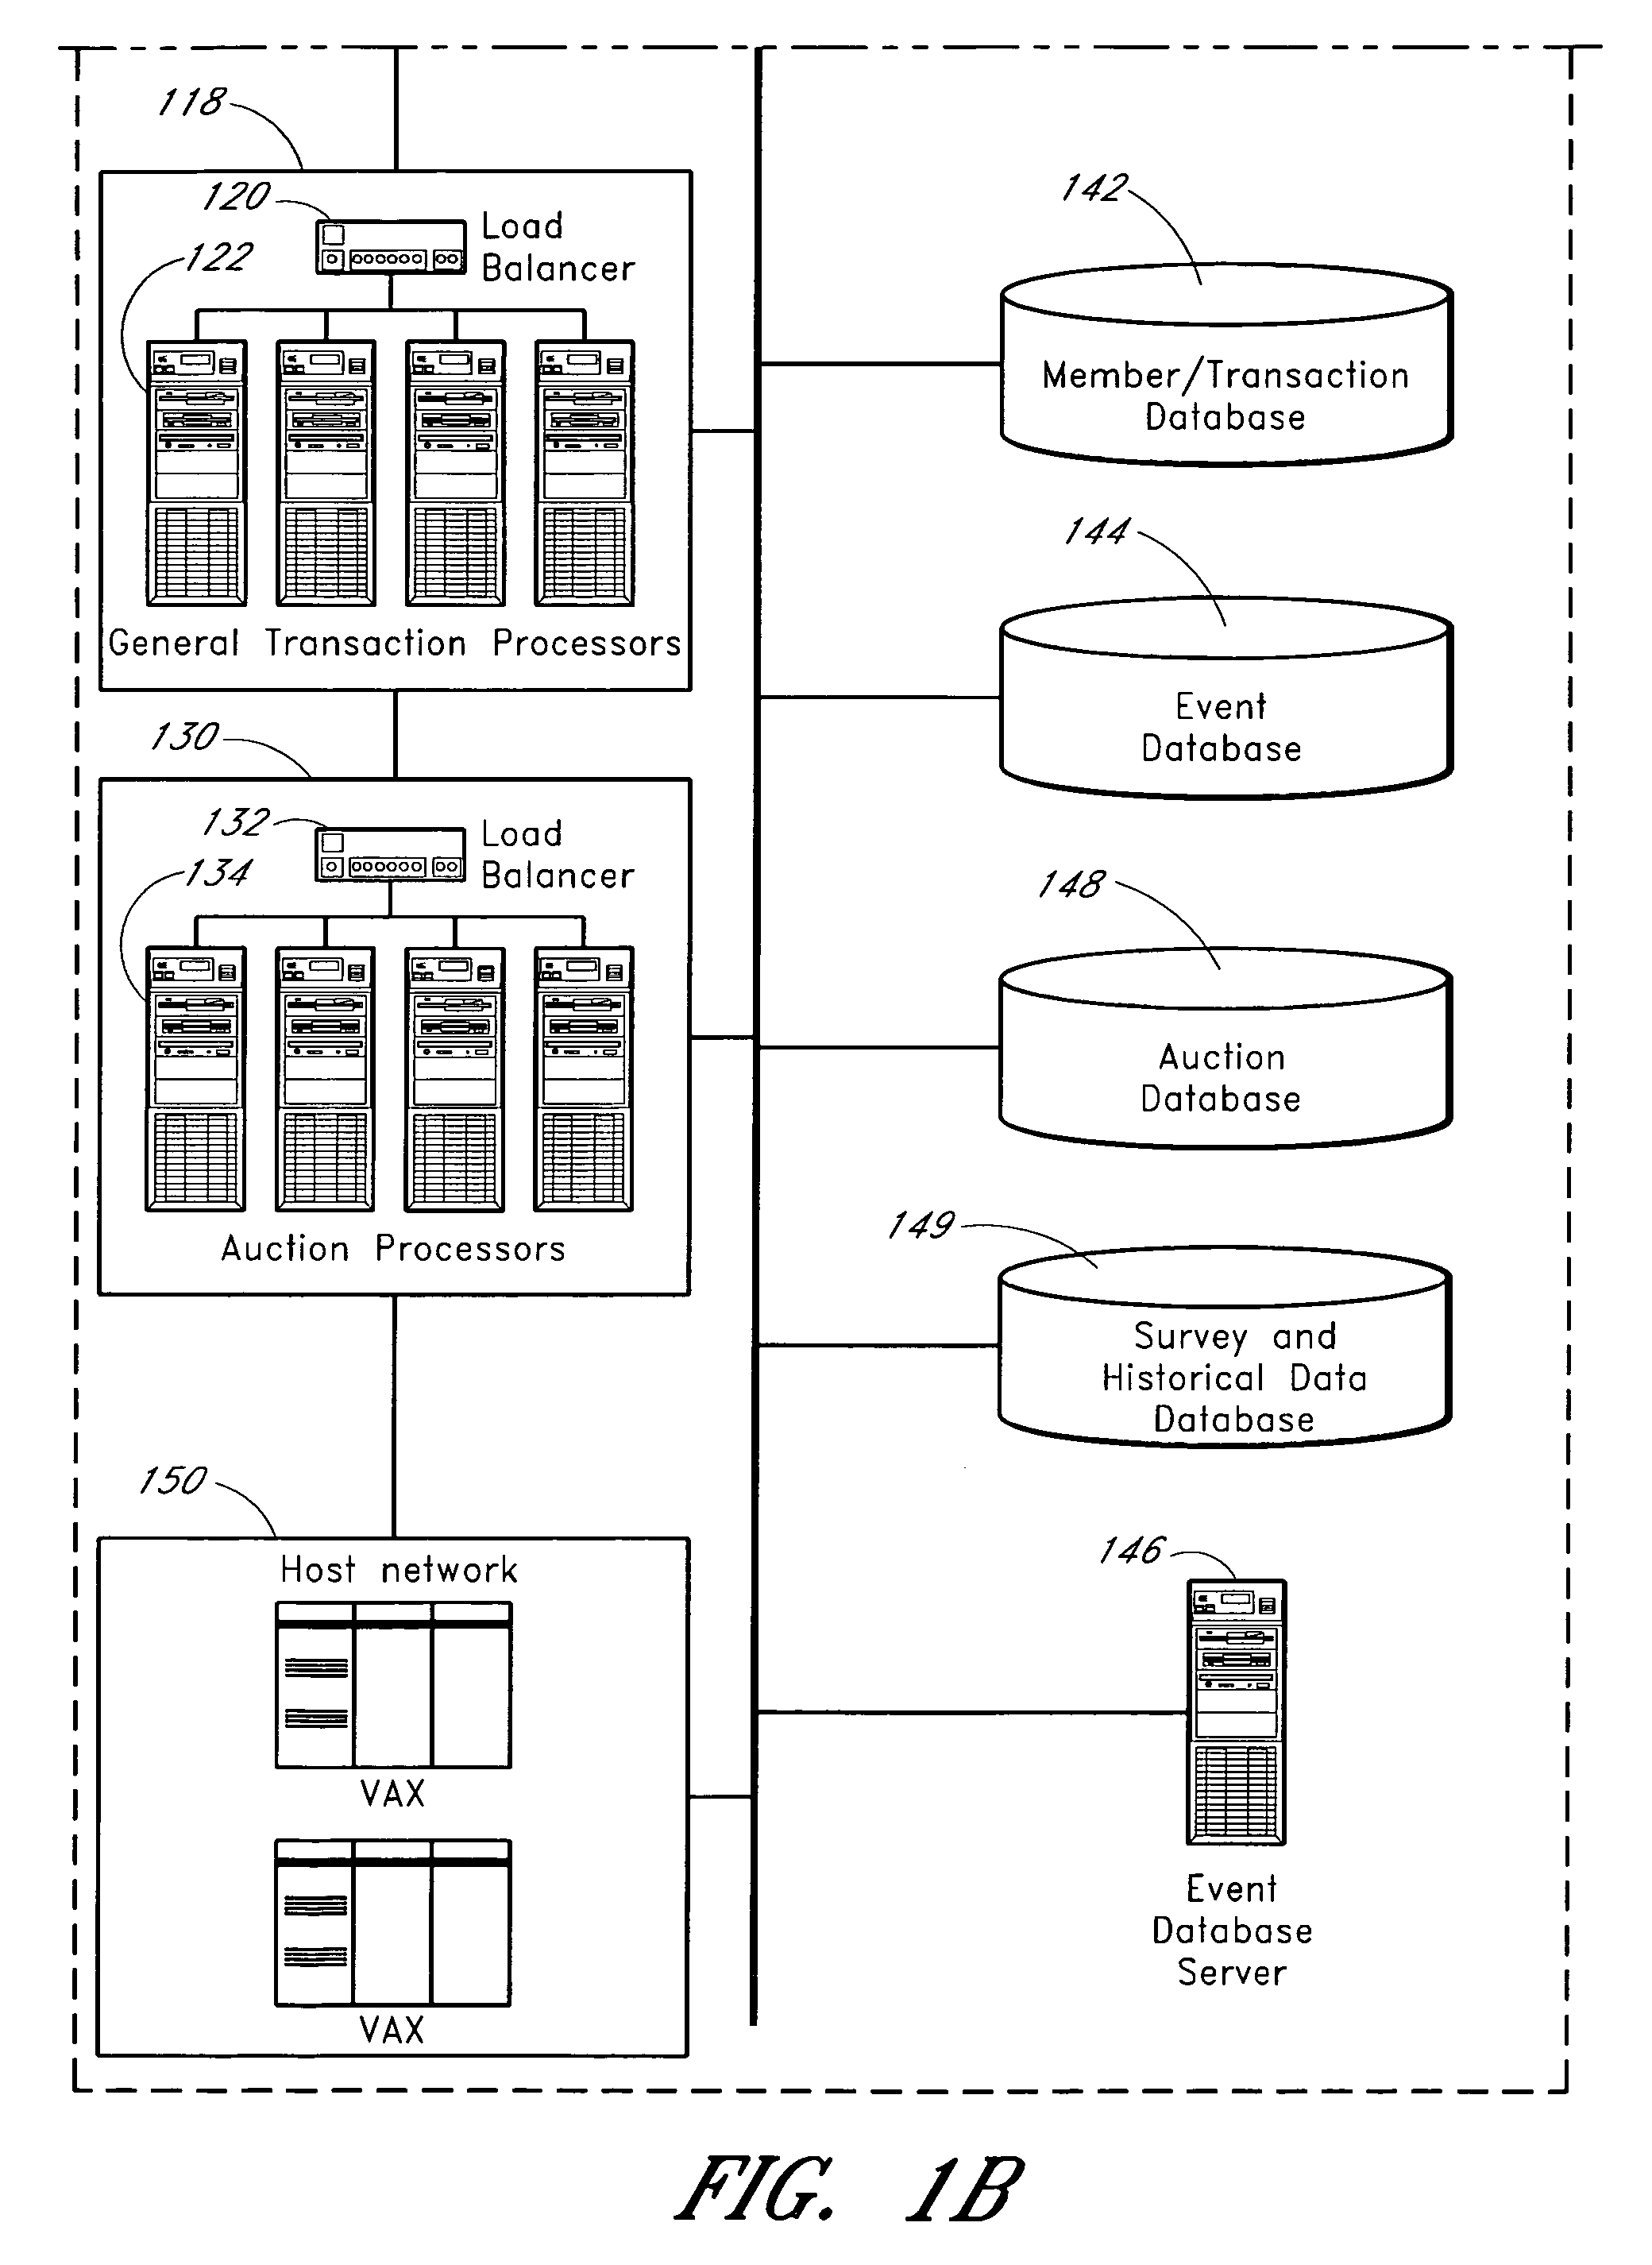 Apparatus and methods for providing queue messaging over a network